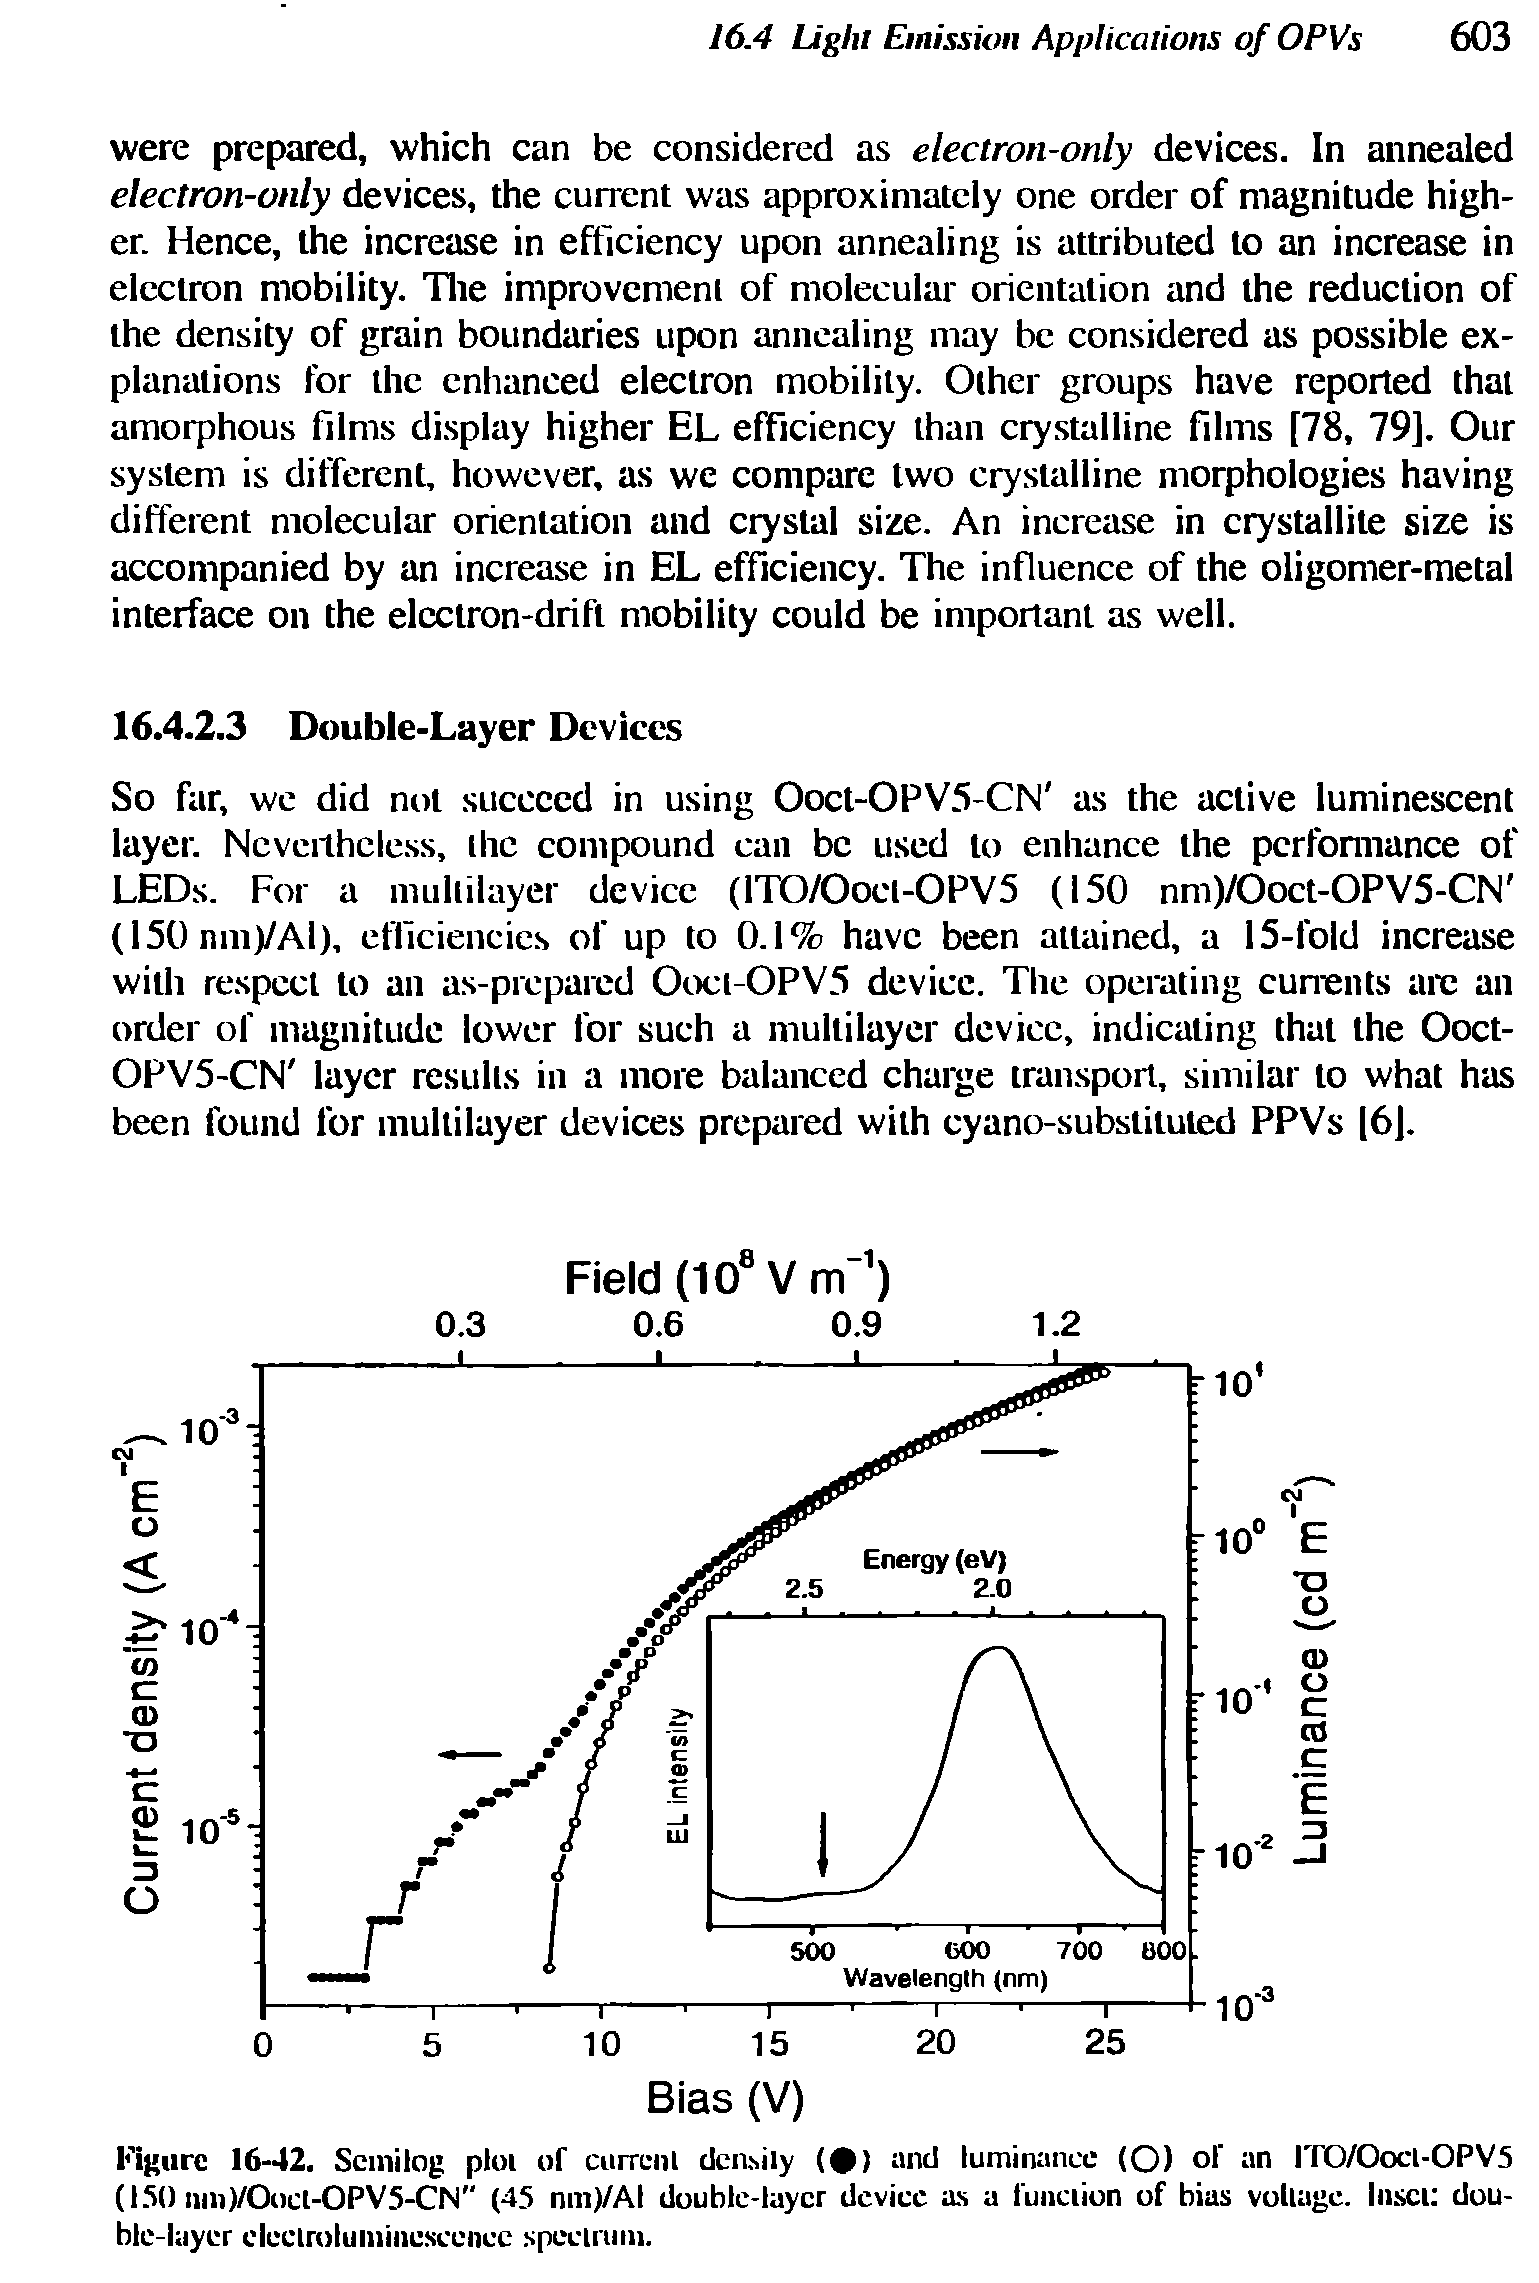 Figure 16-42. Semi log ploi of current density (0) and luminance (O) of an ITO/Oocl-OPV5 (ISO nm)/Oocl-OPV5-CN" (45 nm)/AI double-layer device as a function of bias voltage. Inset double-layer electroluminescence spectrum.